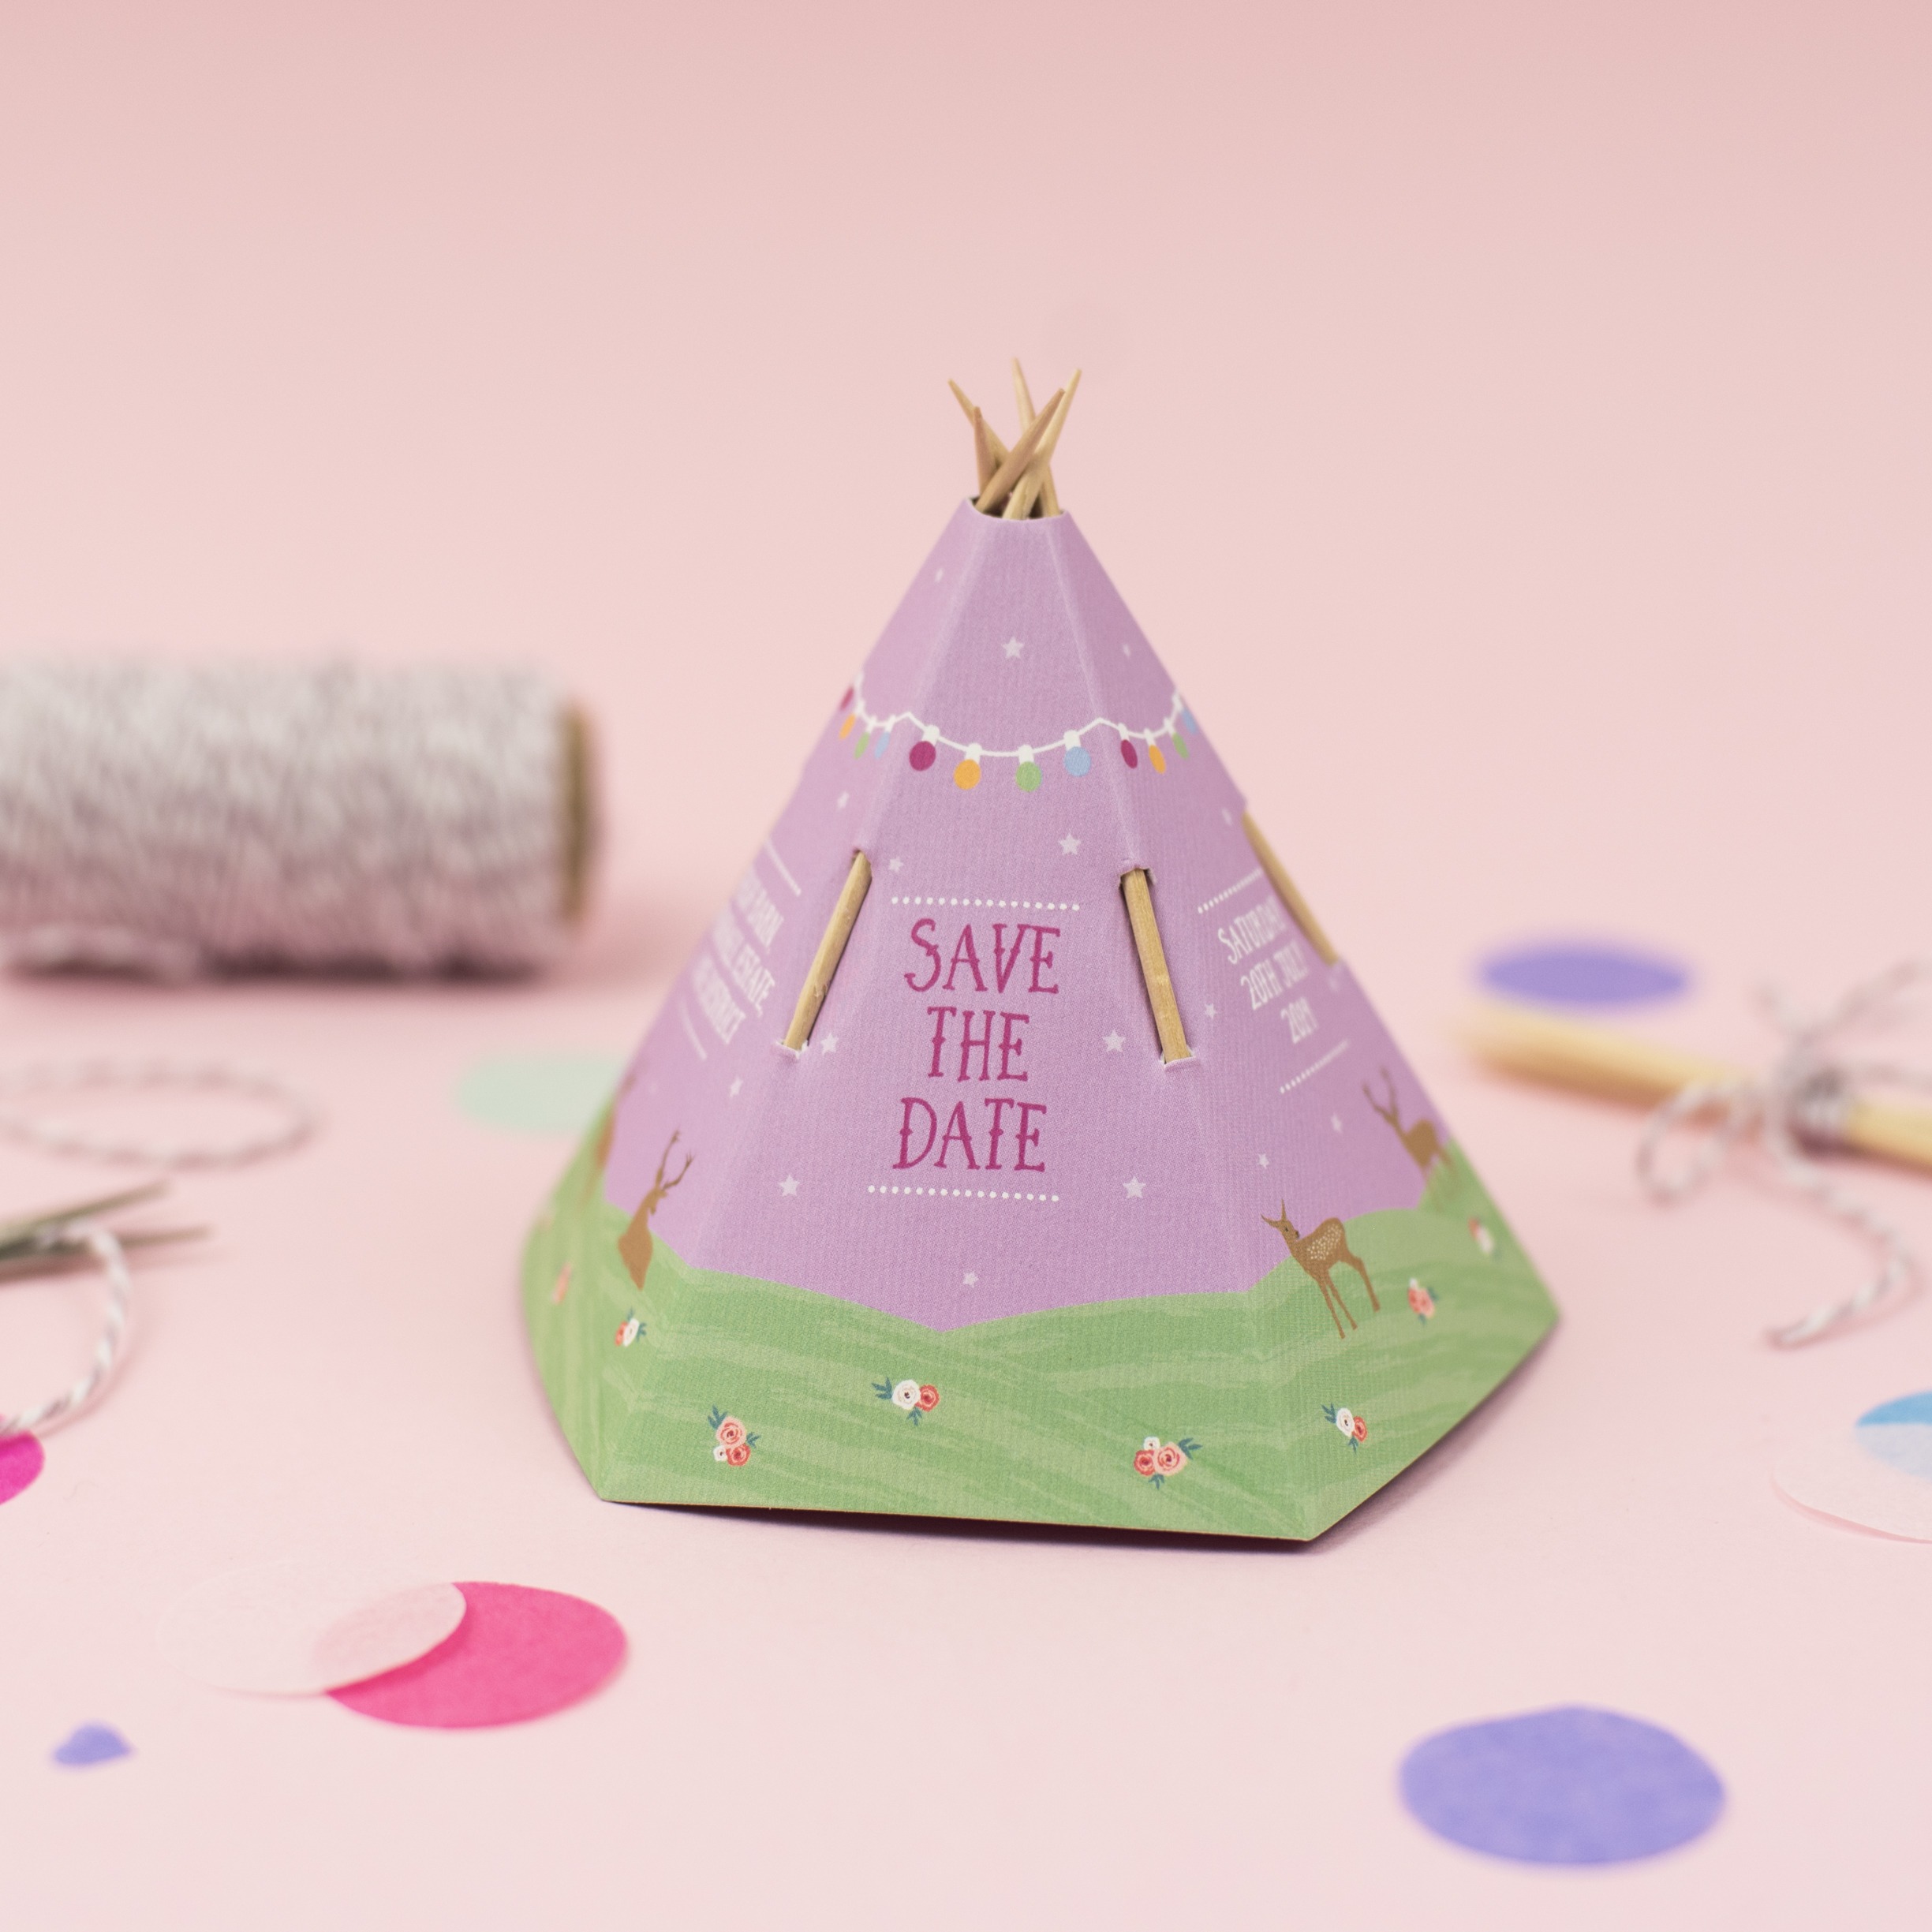 emma Fisher blush and Blossom Paper Bepsoke Tipi Save the Dates